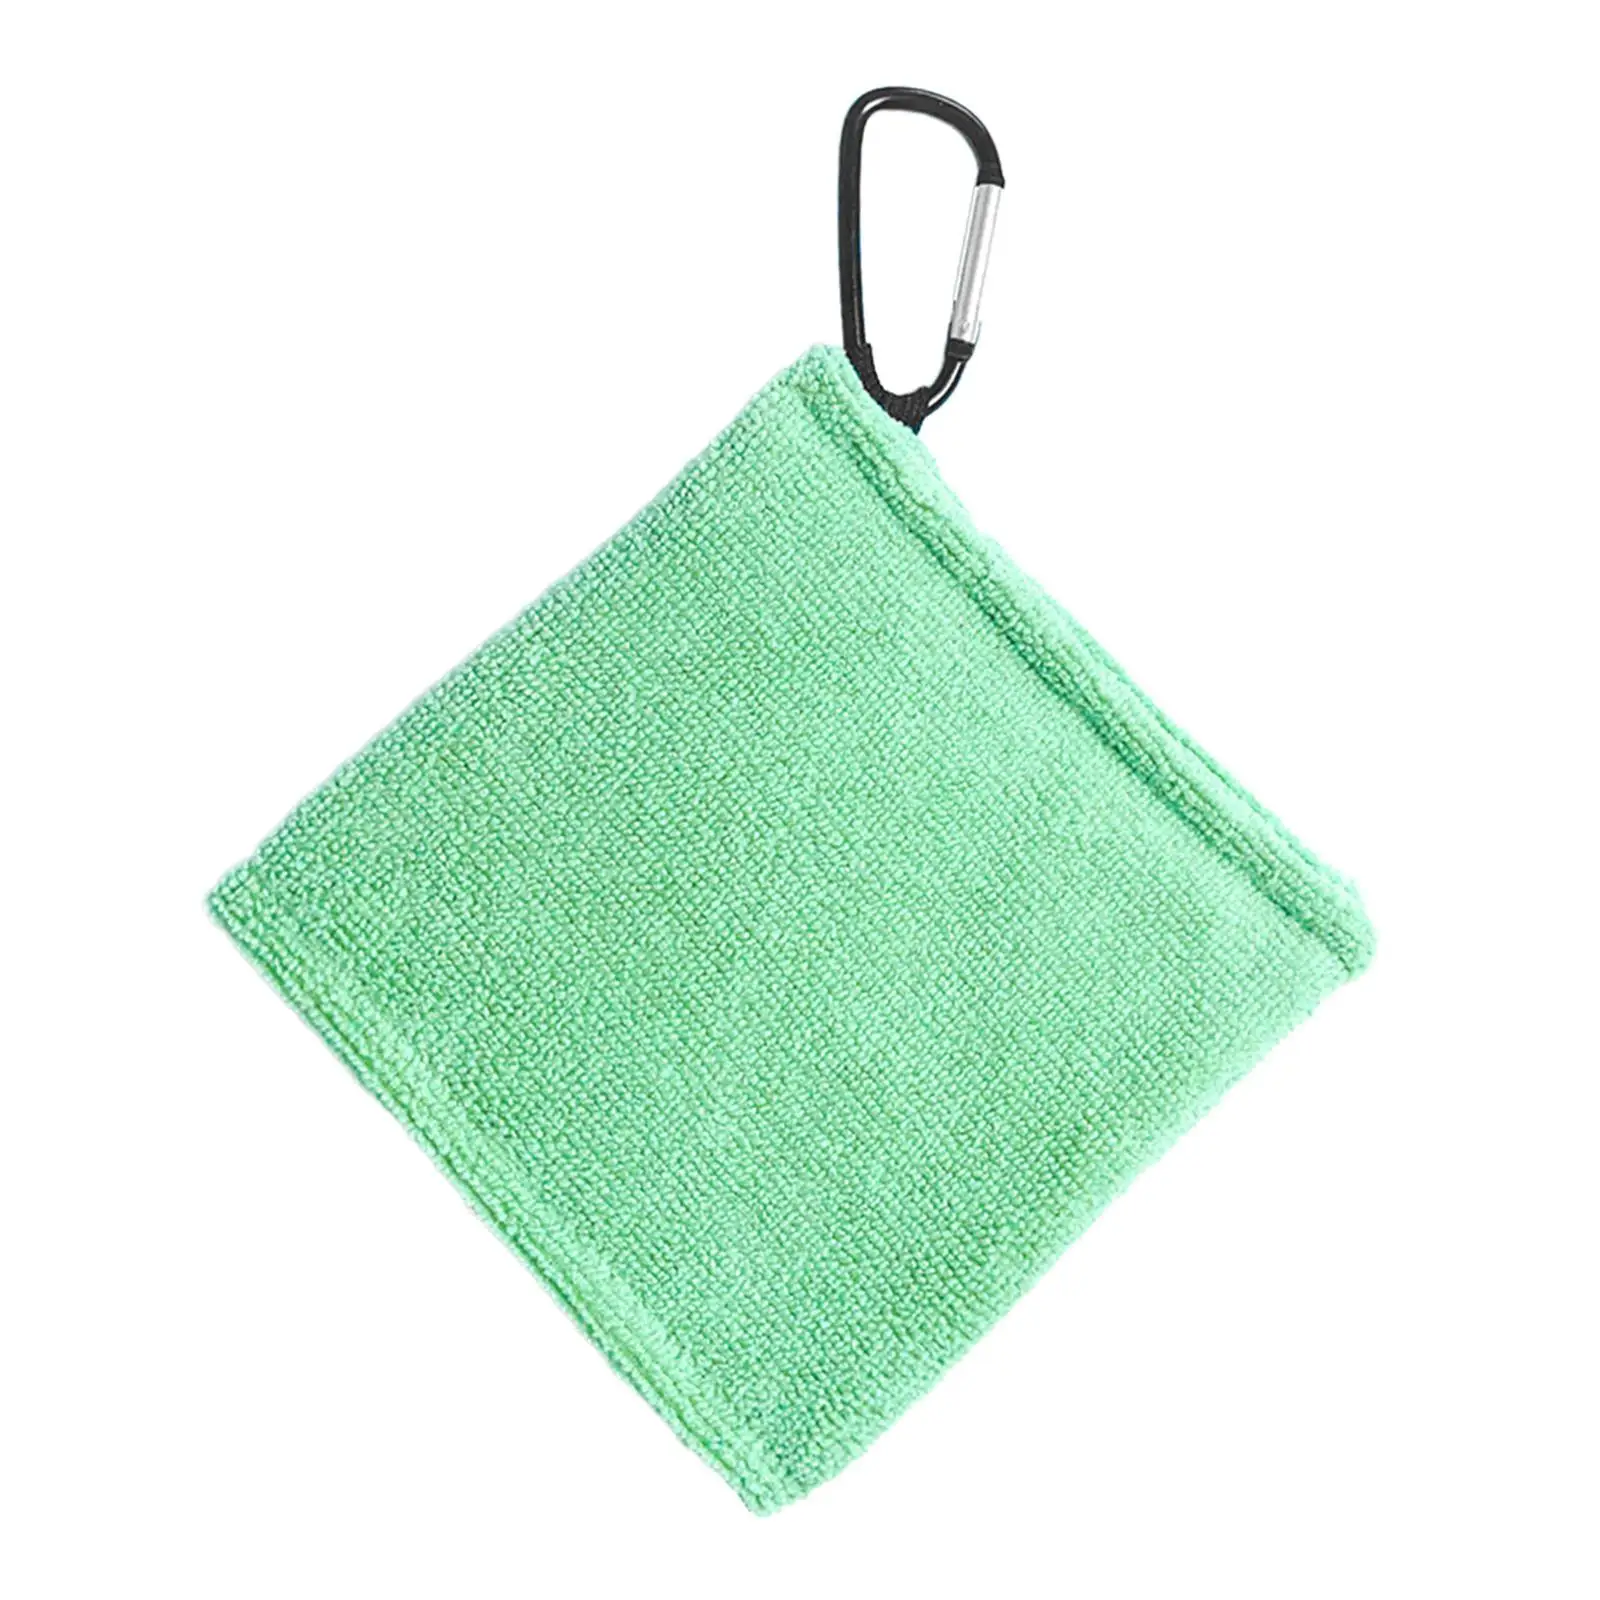 Golf Ball Towel with Clip, Wiping Cloth, Golf Ball Cleaning Towel, Golf Ball Cleaner Pocket